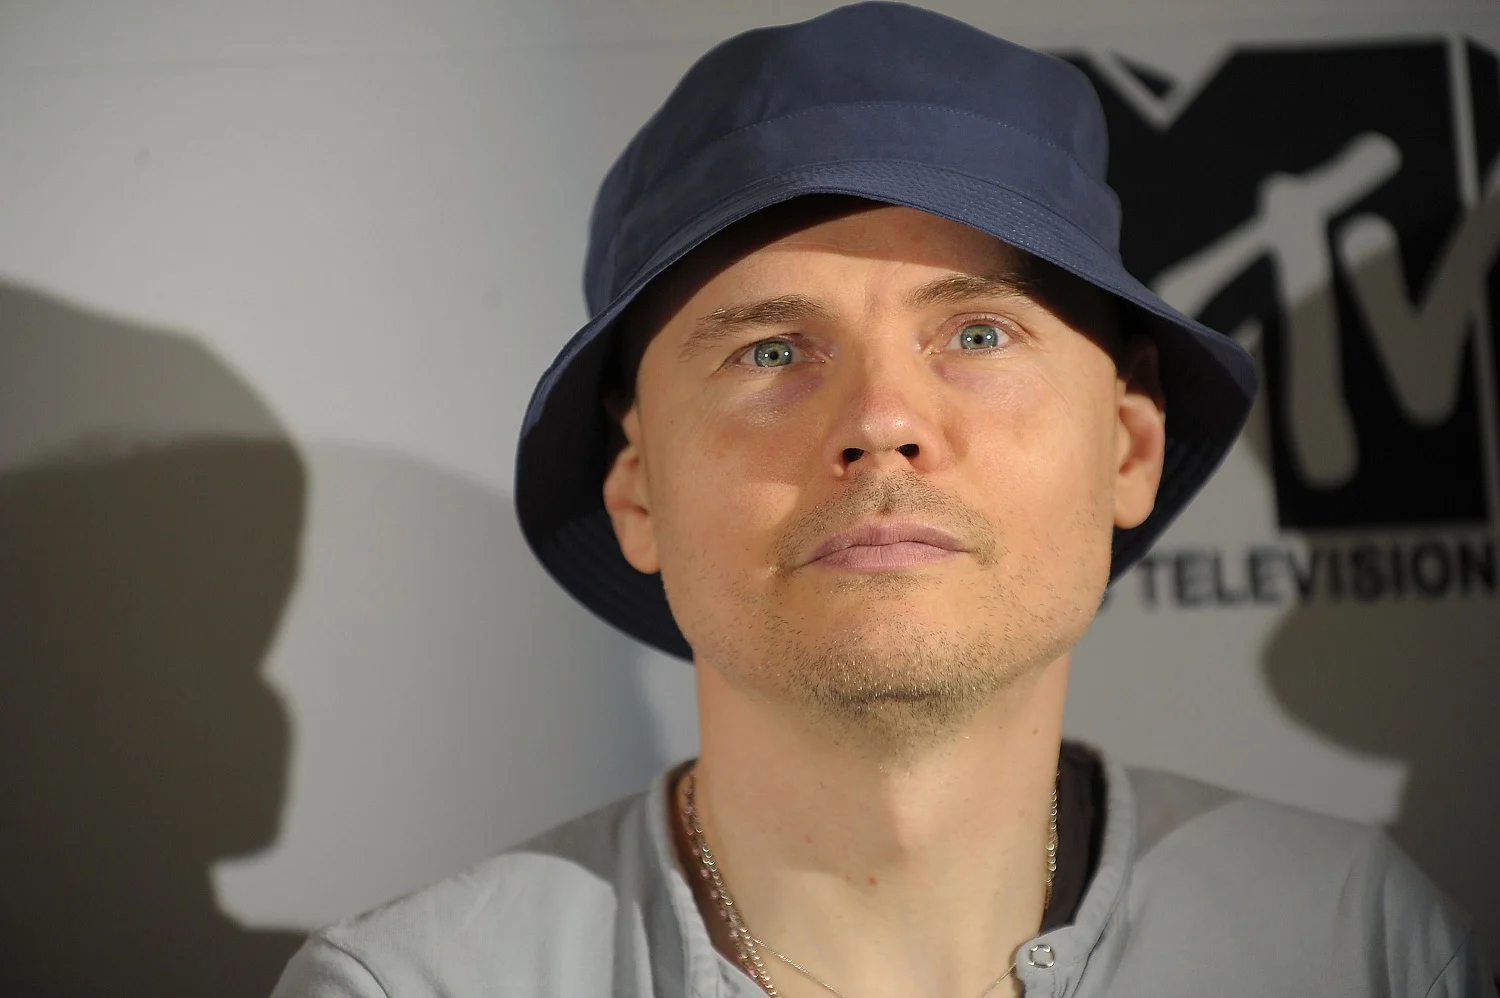 Billy Corgan Net Worth, Biography, Awards, and More